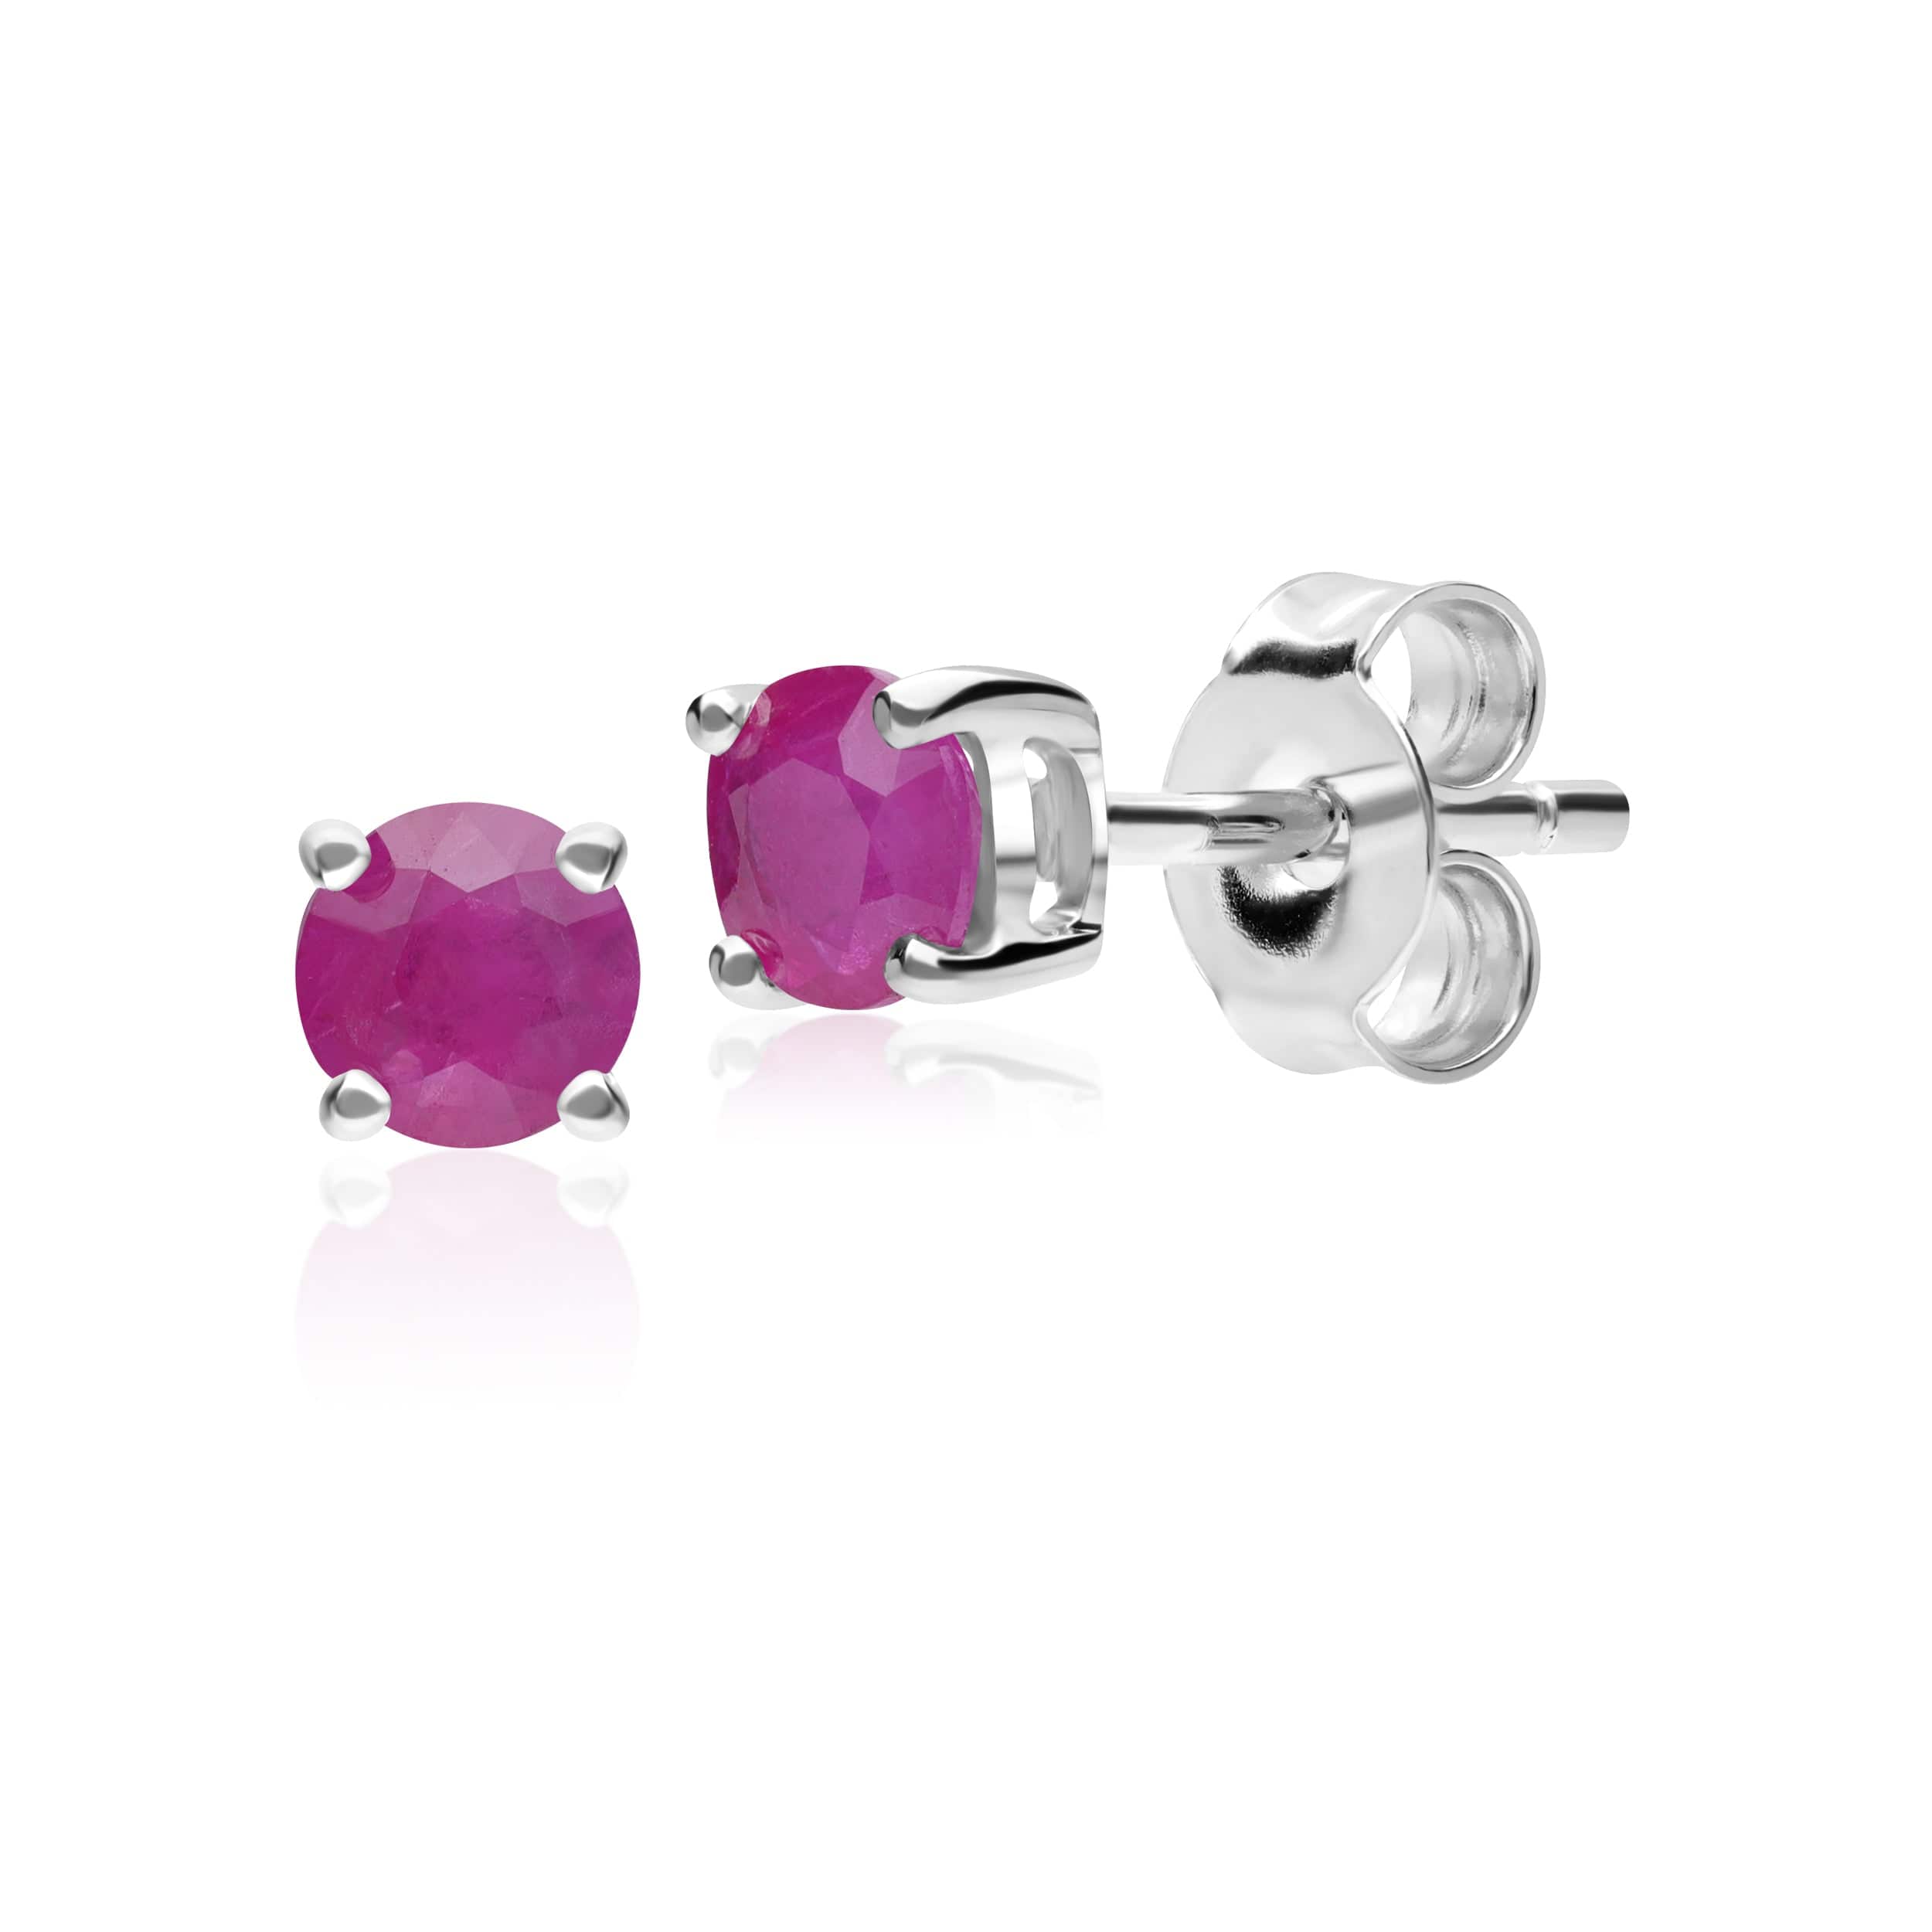 11622 Classic Round Ruby Stud Earrings in 9ct White Gold 1